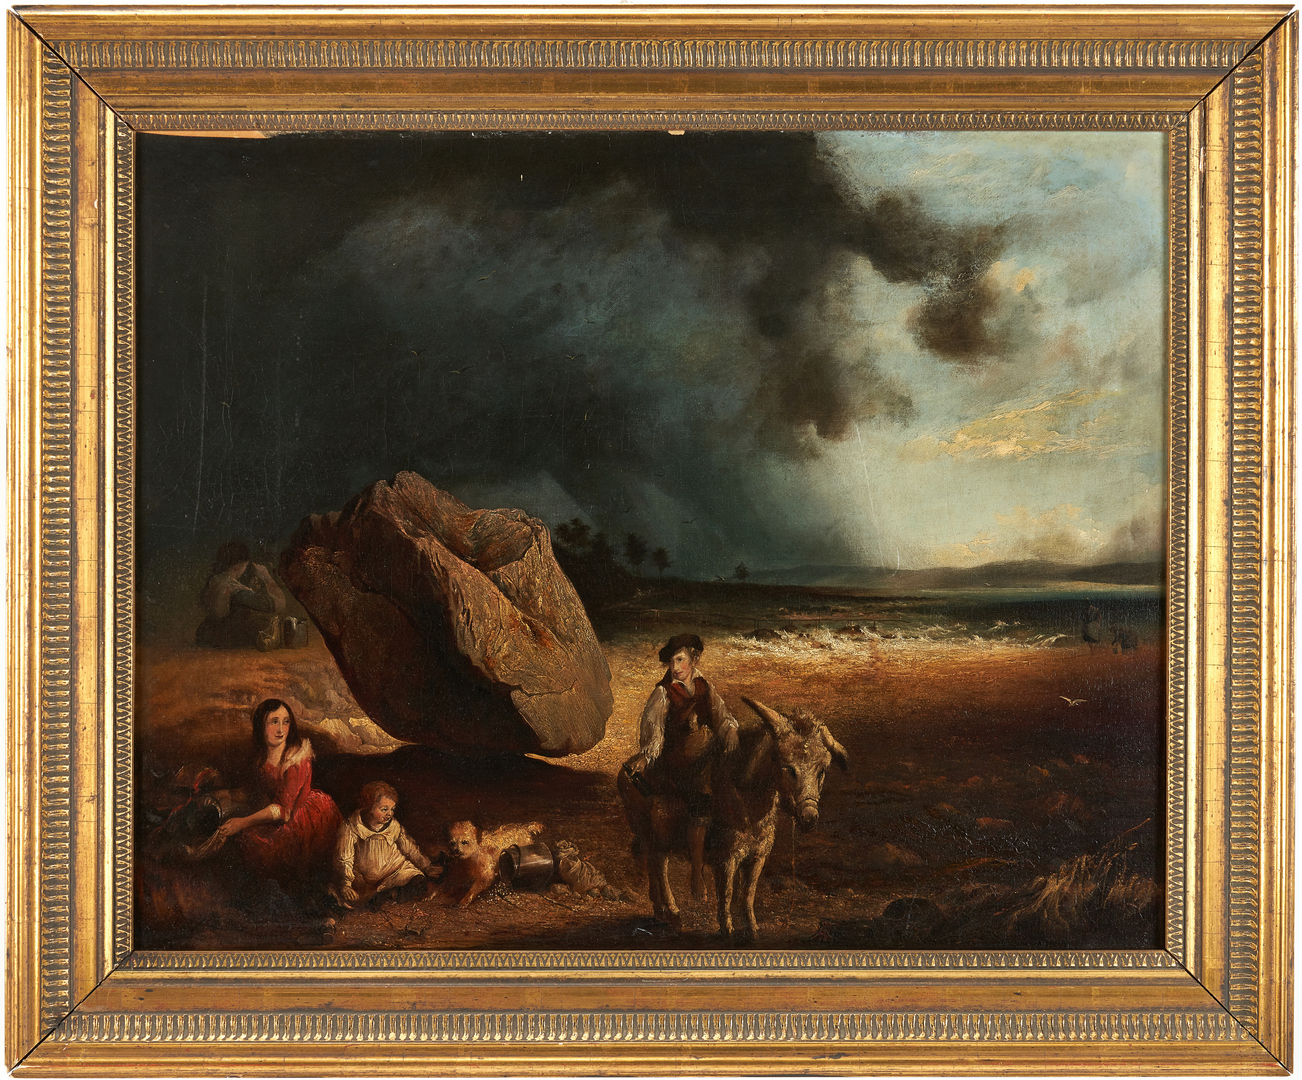 Lot 320: Attr. James Burgess, Figures in an Approaching Storm